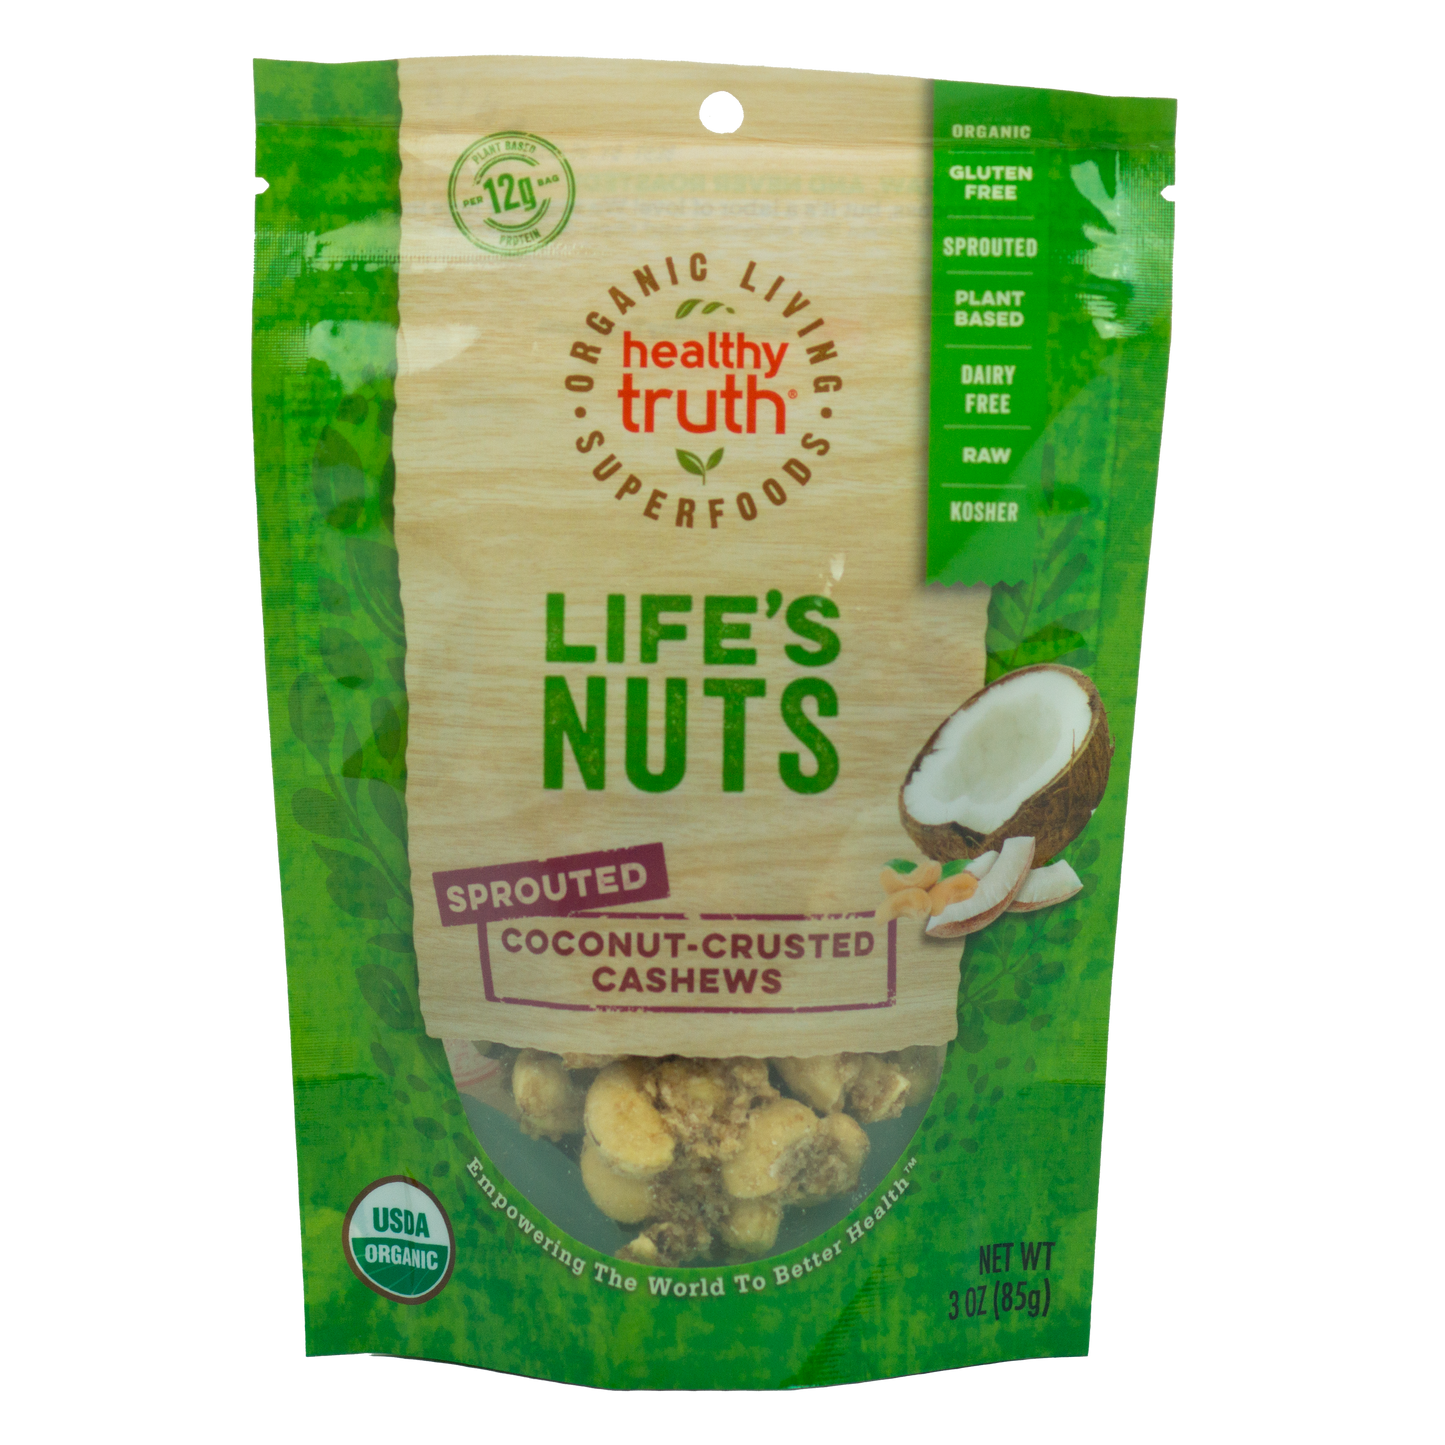 Life's Nuts Coconut-Crusted Cashews (3 oz.)